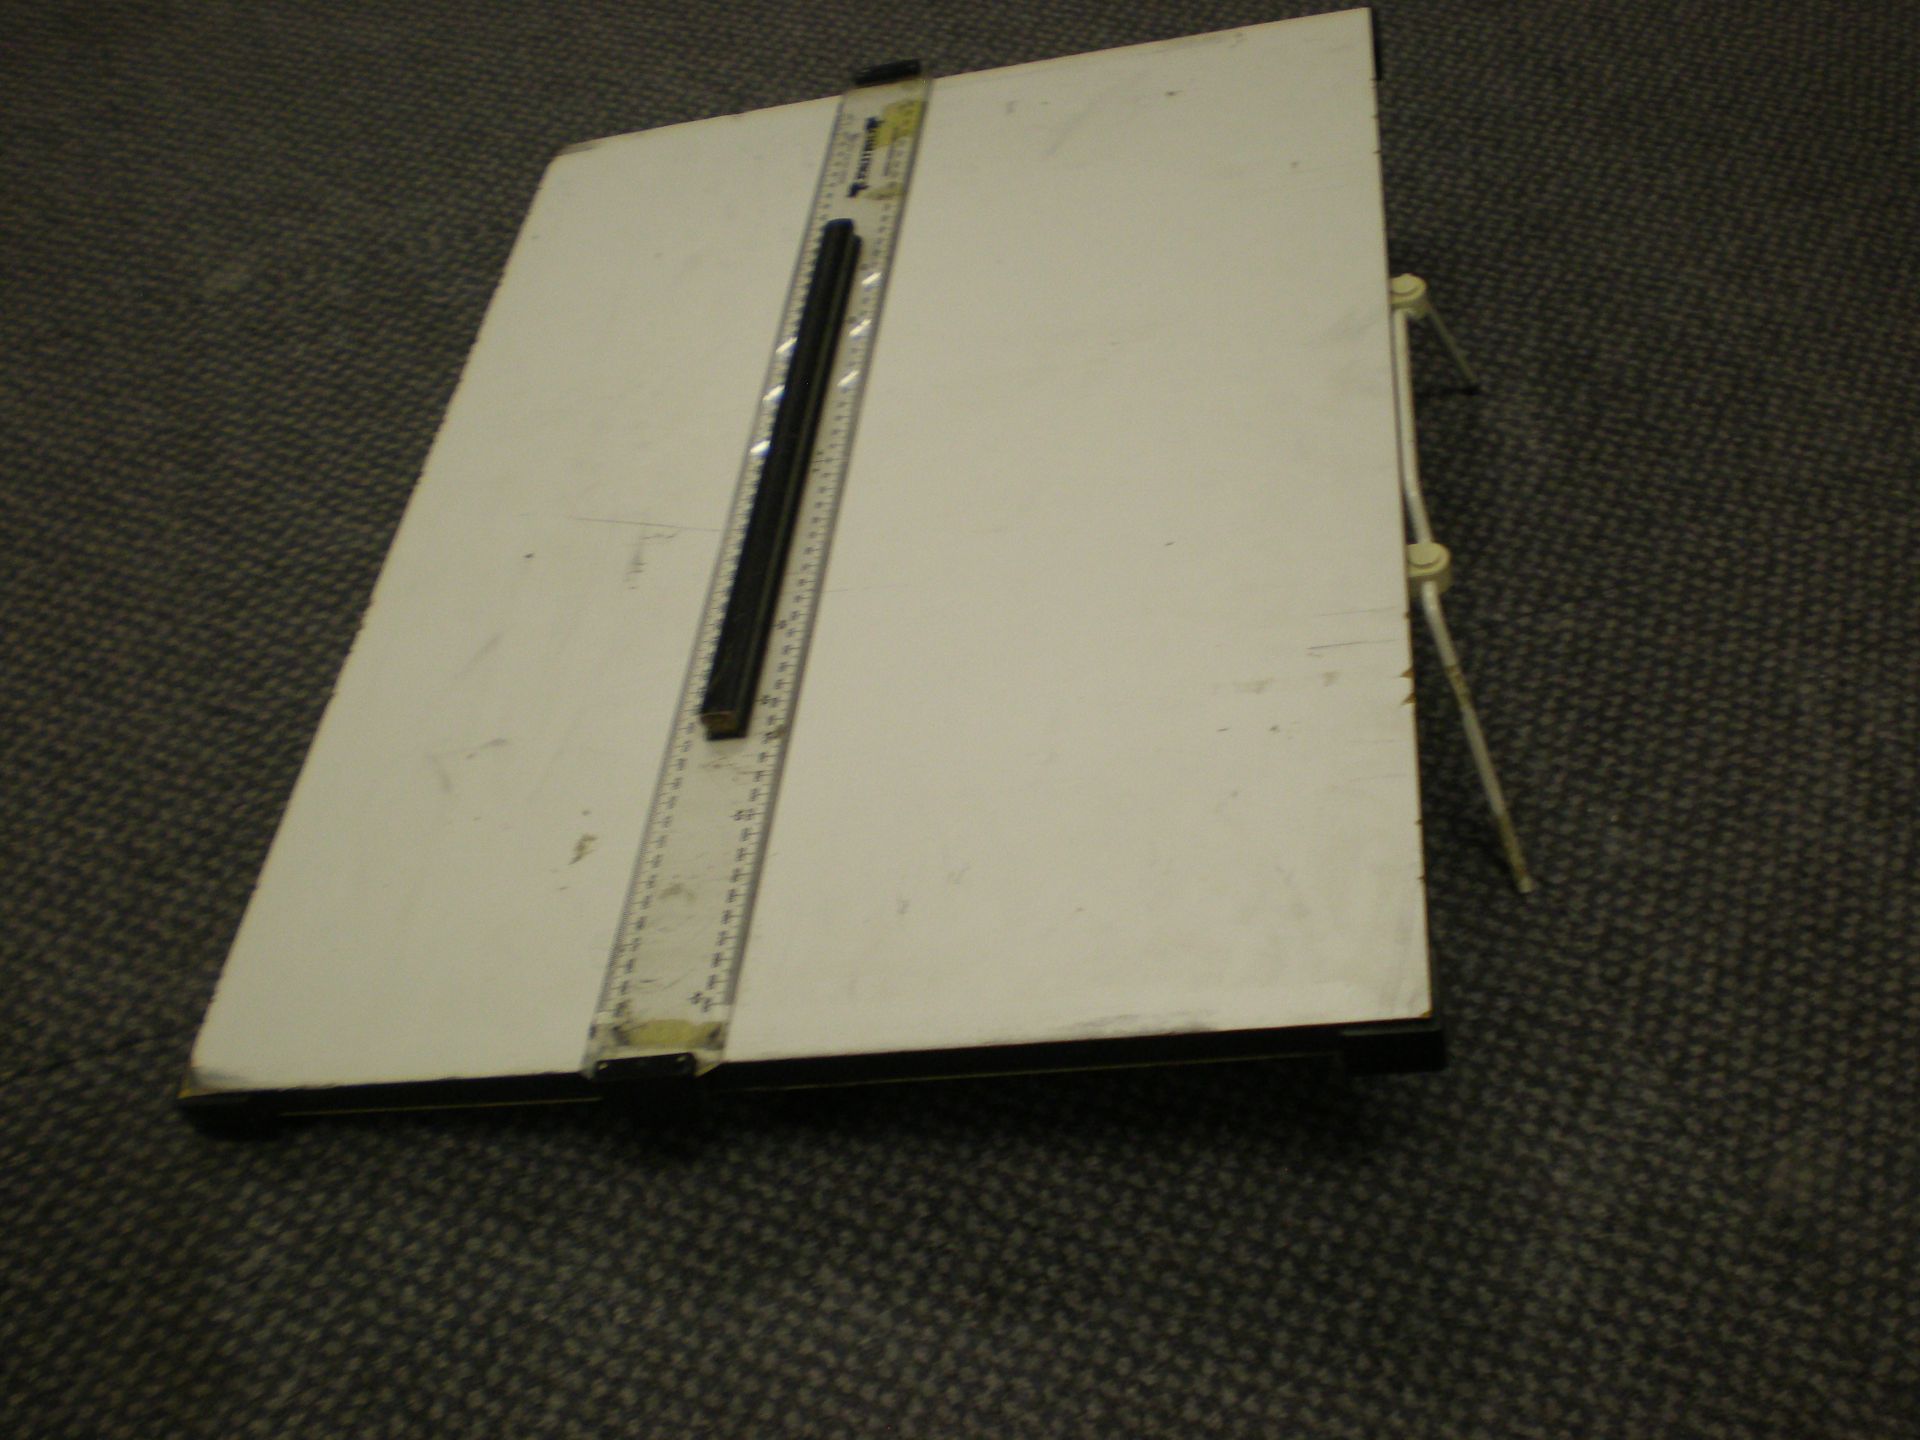 Set Of 23 Desktop Drawing Boards On Trolley With Wheels - Image 7 of 8